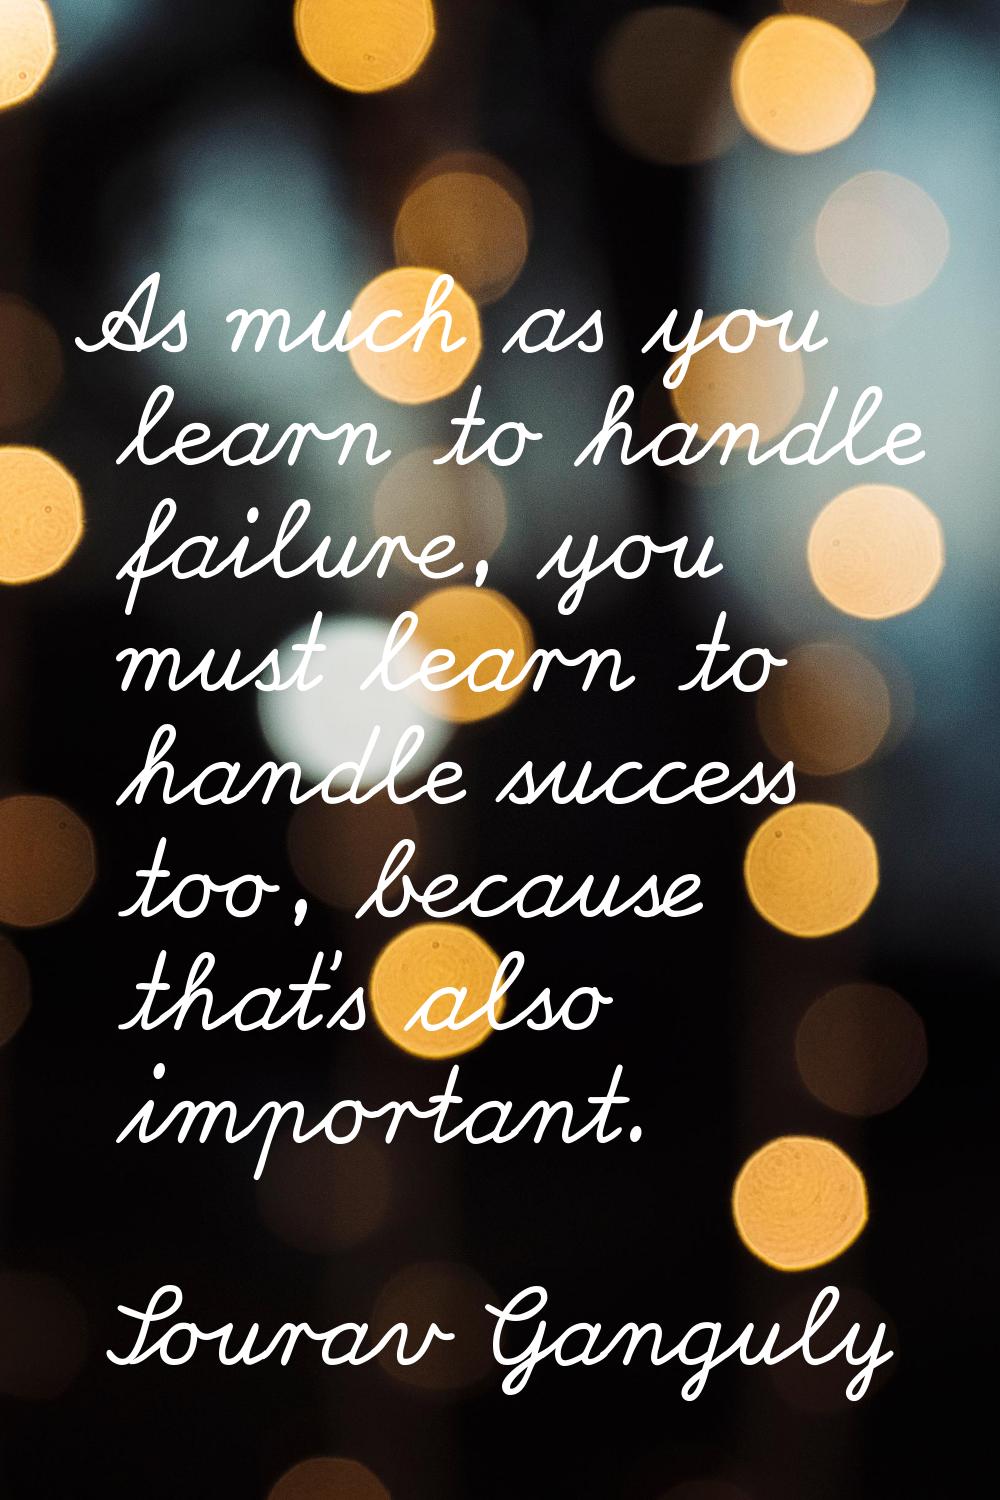 As much as you learn to handle failure, you must learn to handle success too, because that's also i